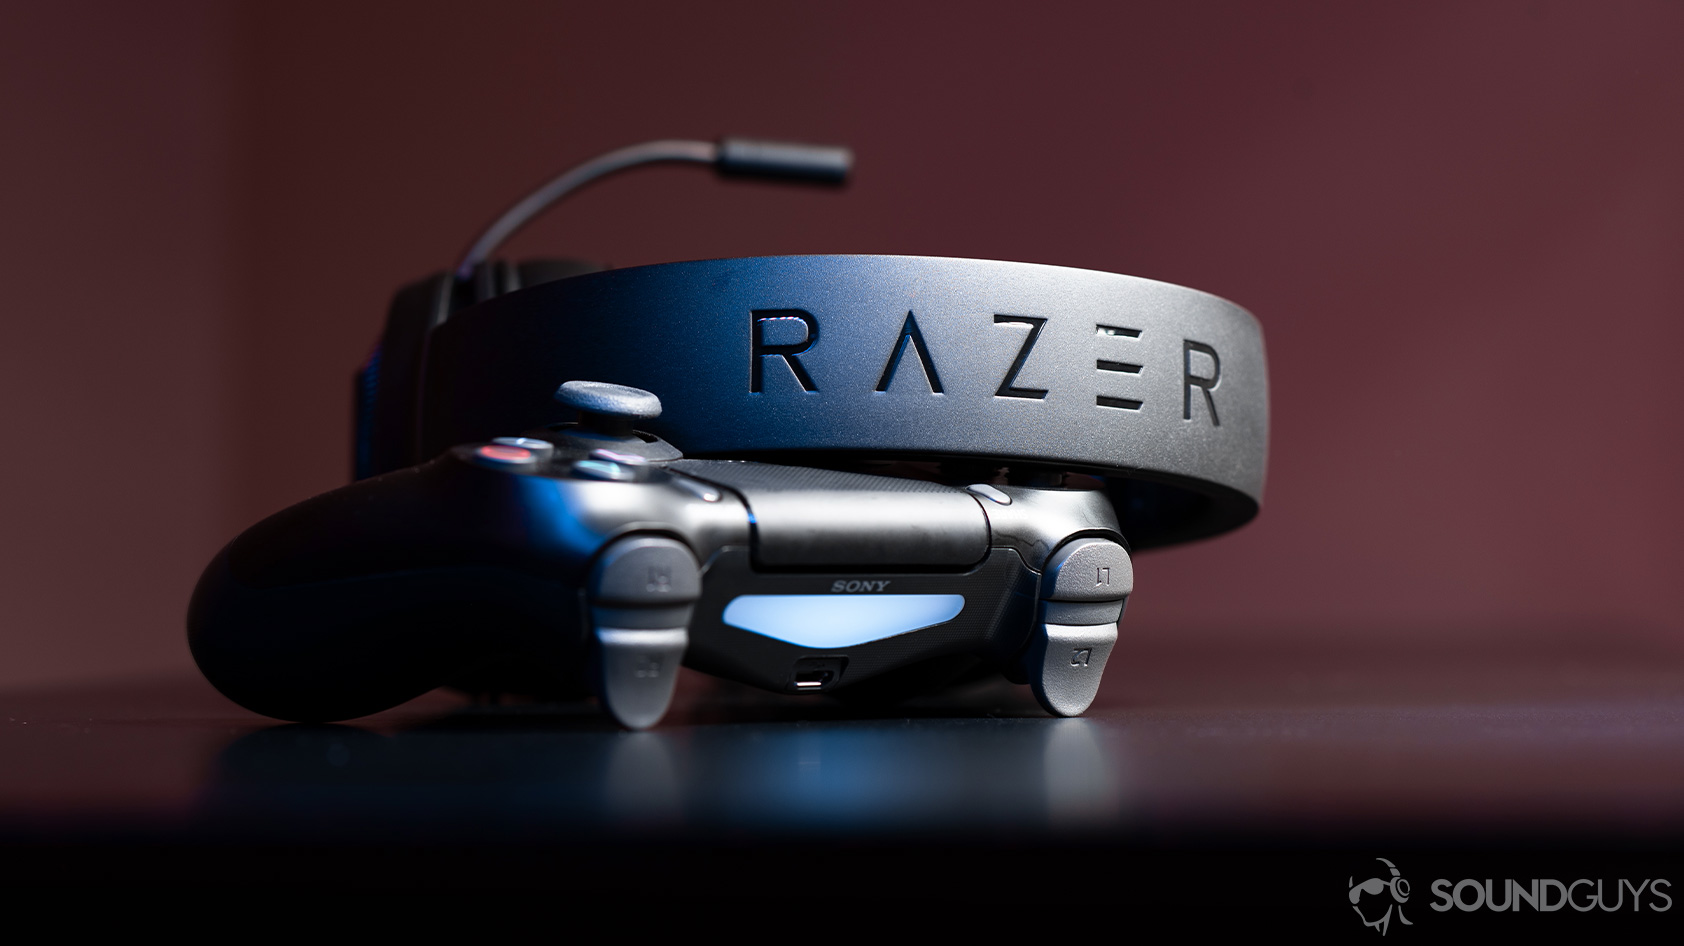 The Razer Kraken X leaning against a PS4 controller with the headband facing the lens to show the Razer logo.